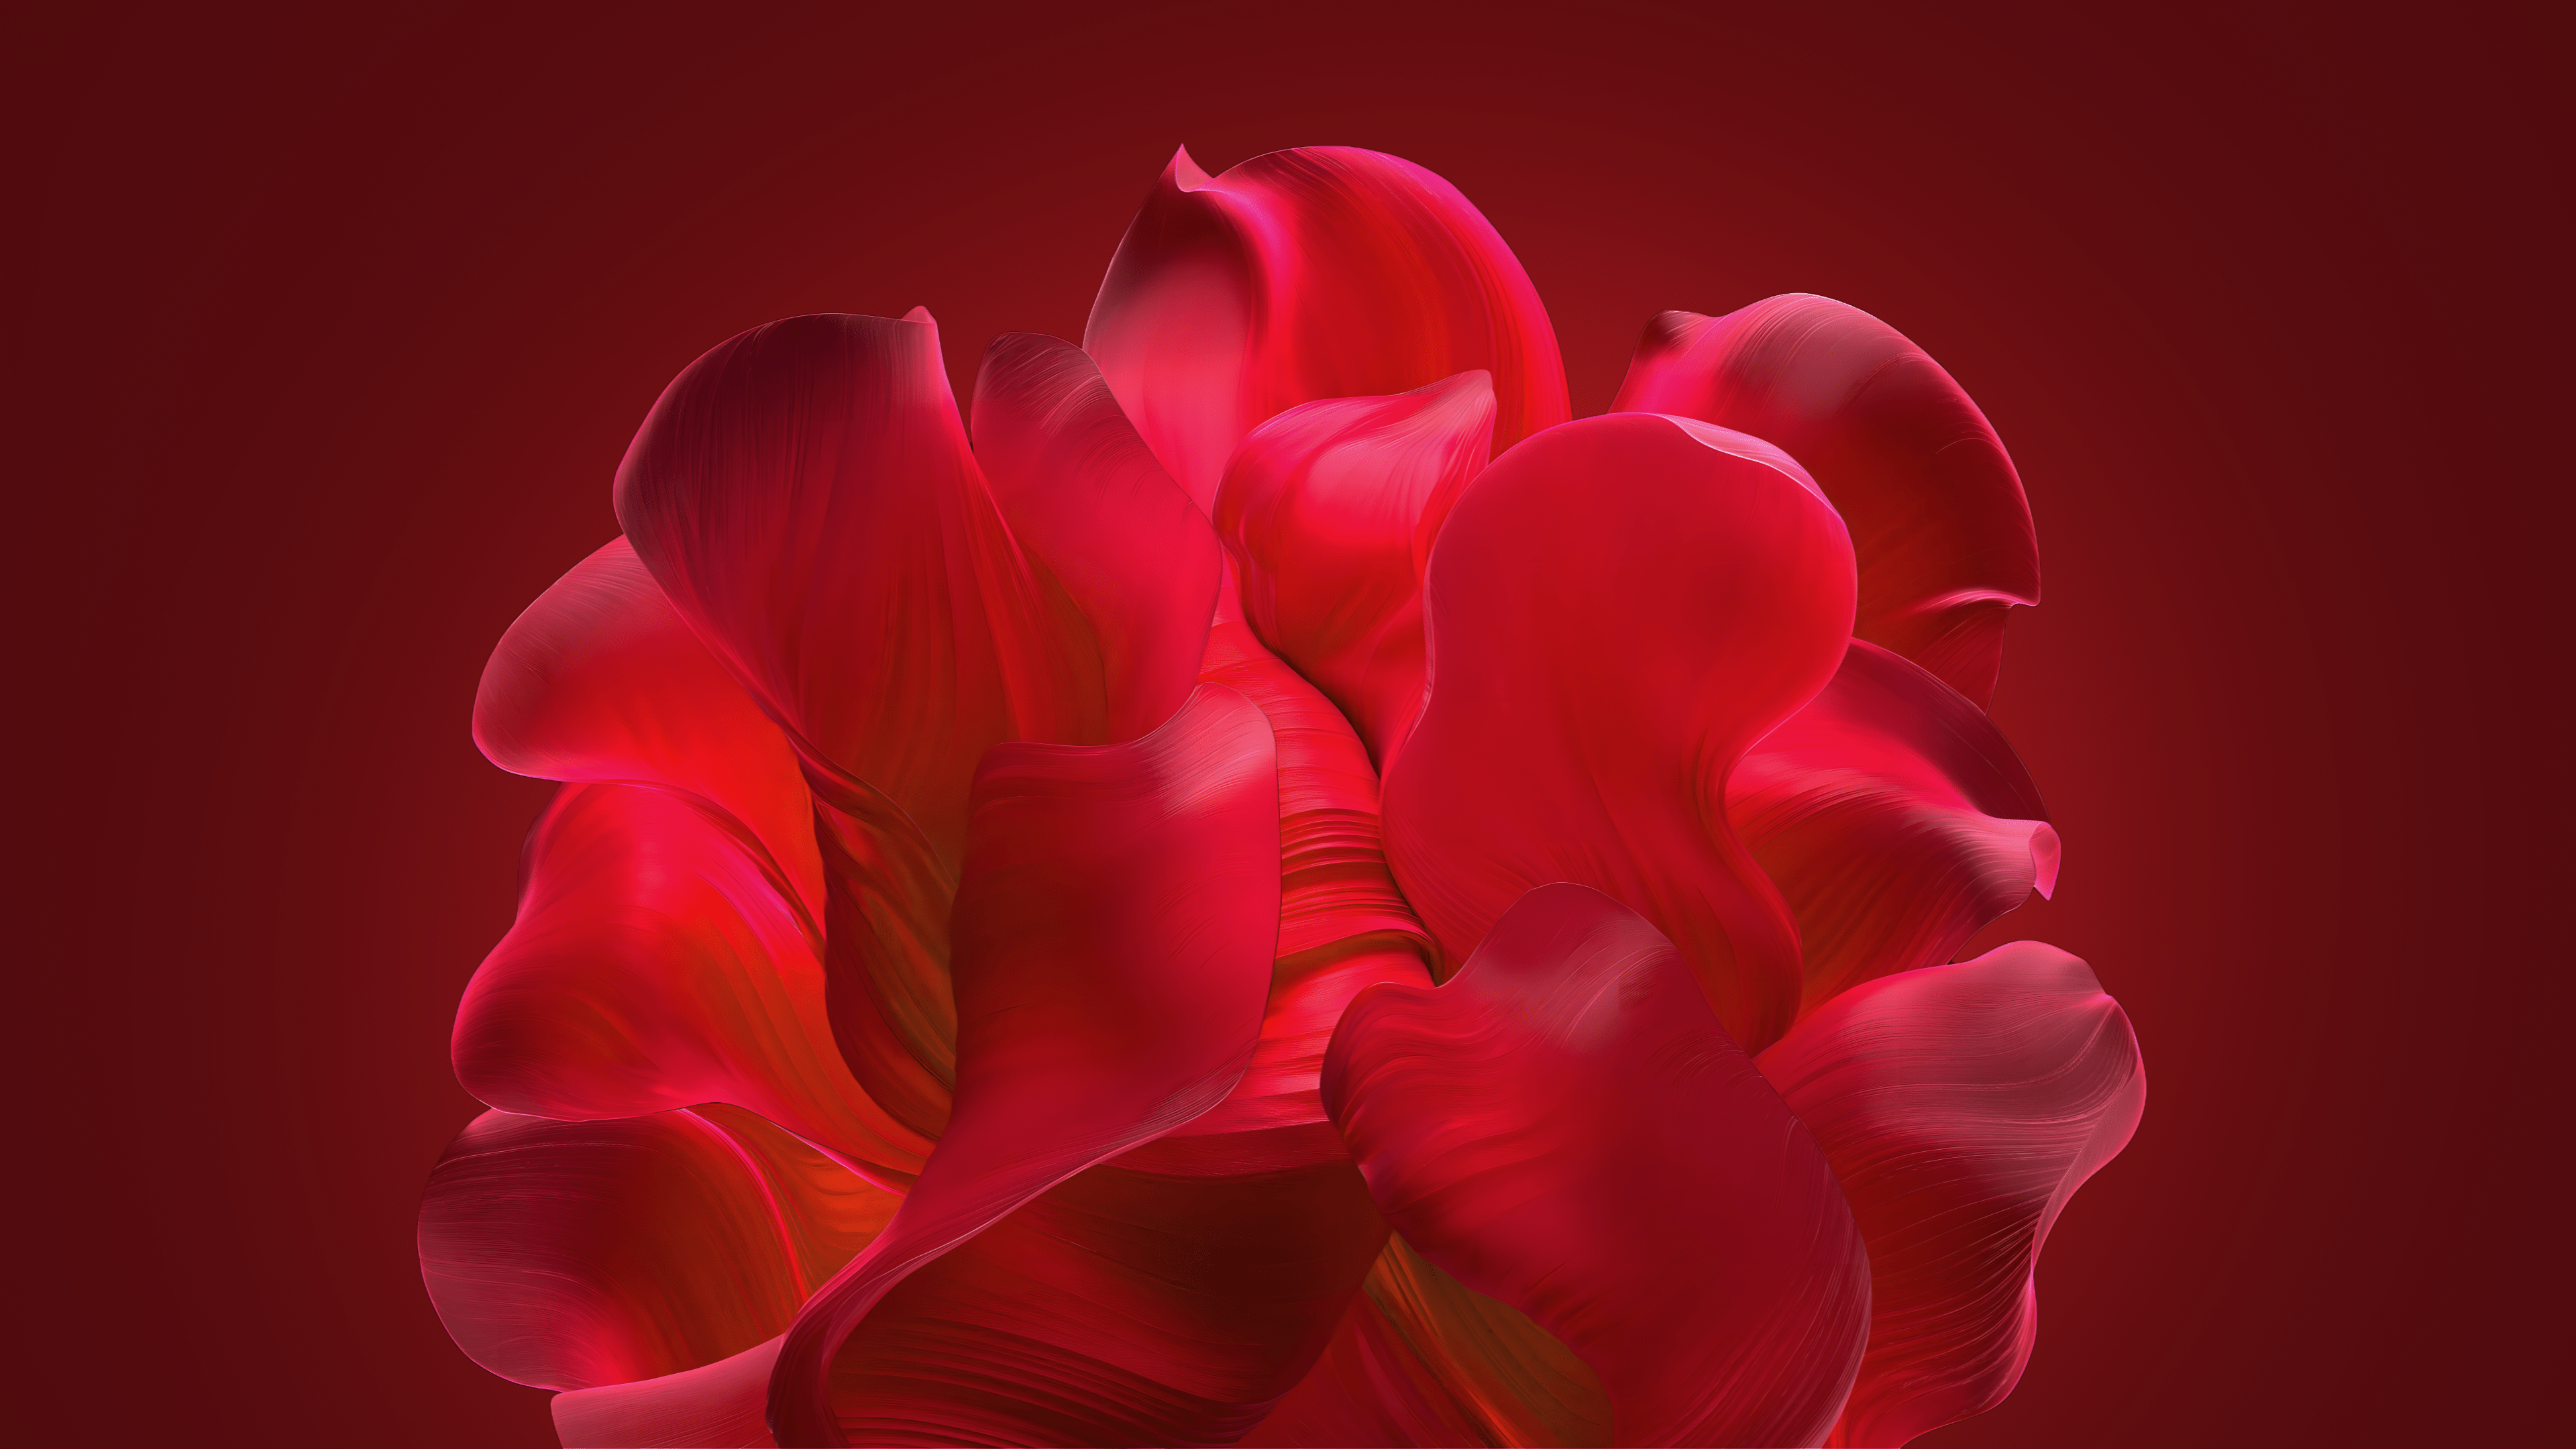 Windows 11 Wallpaper 4K, Bloom collection, Red background